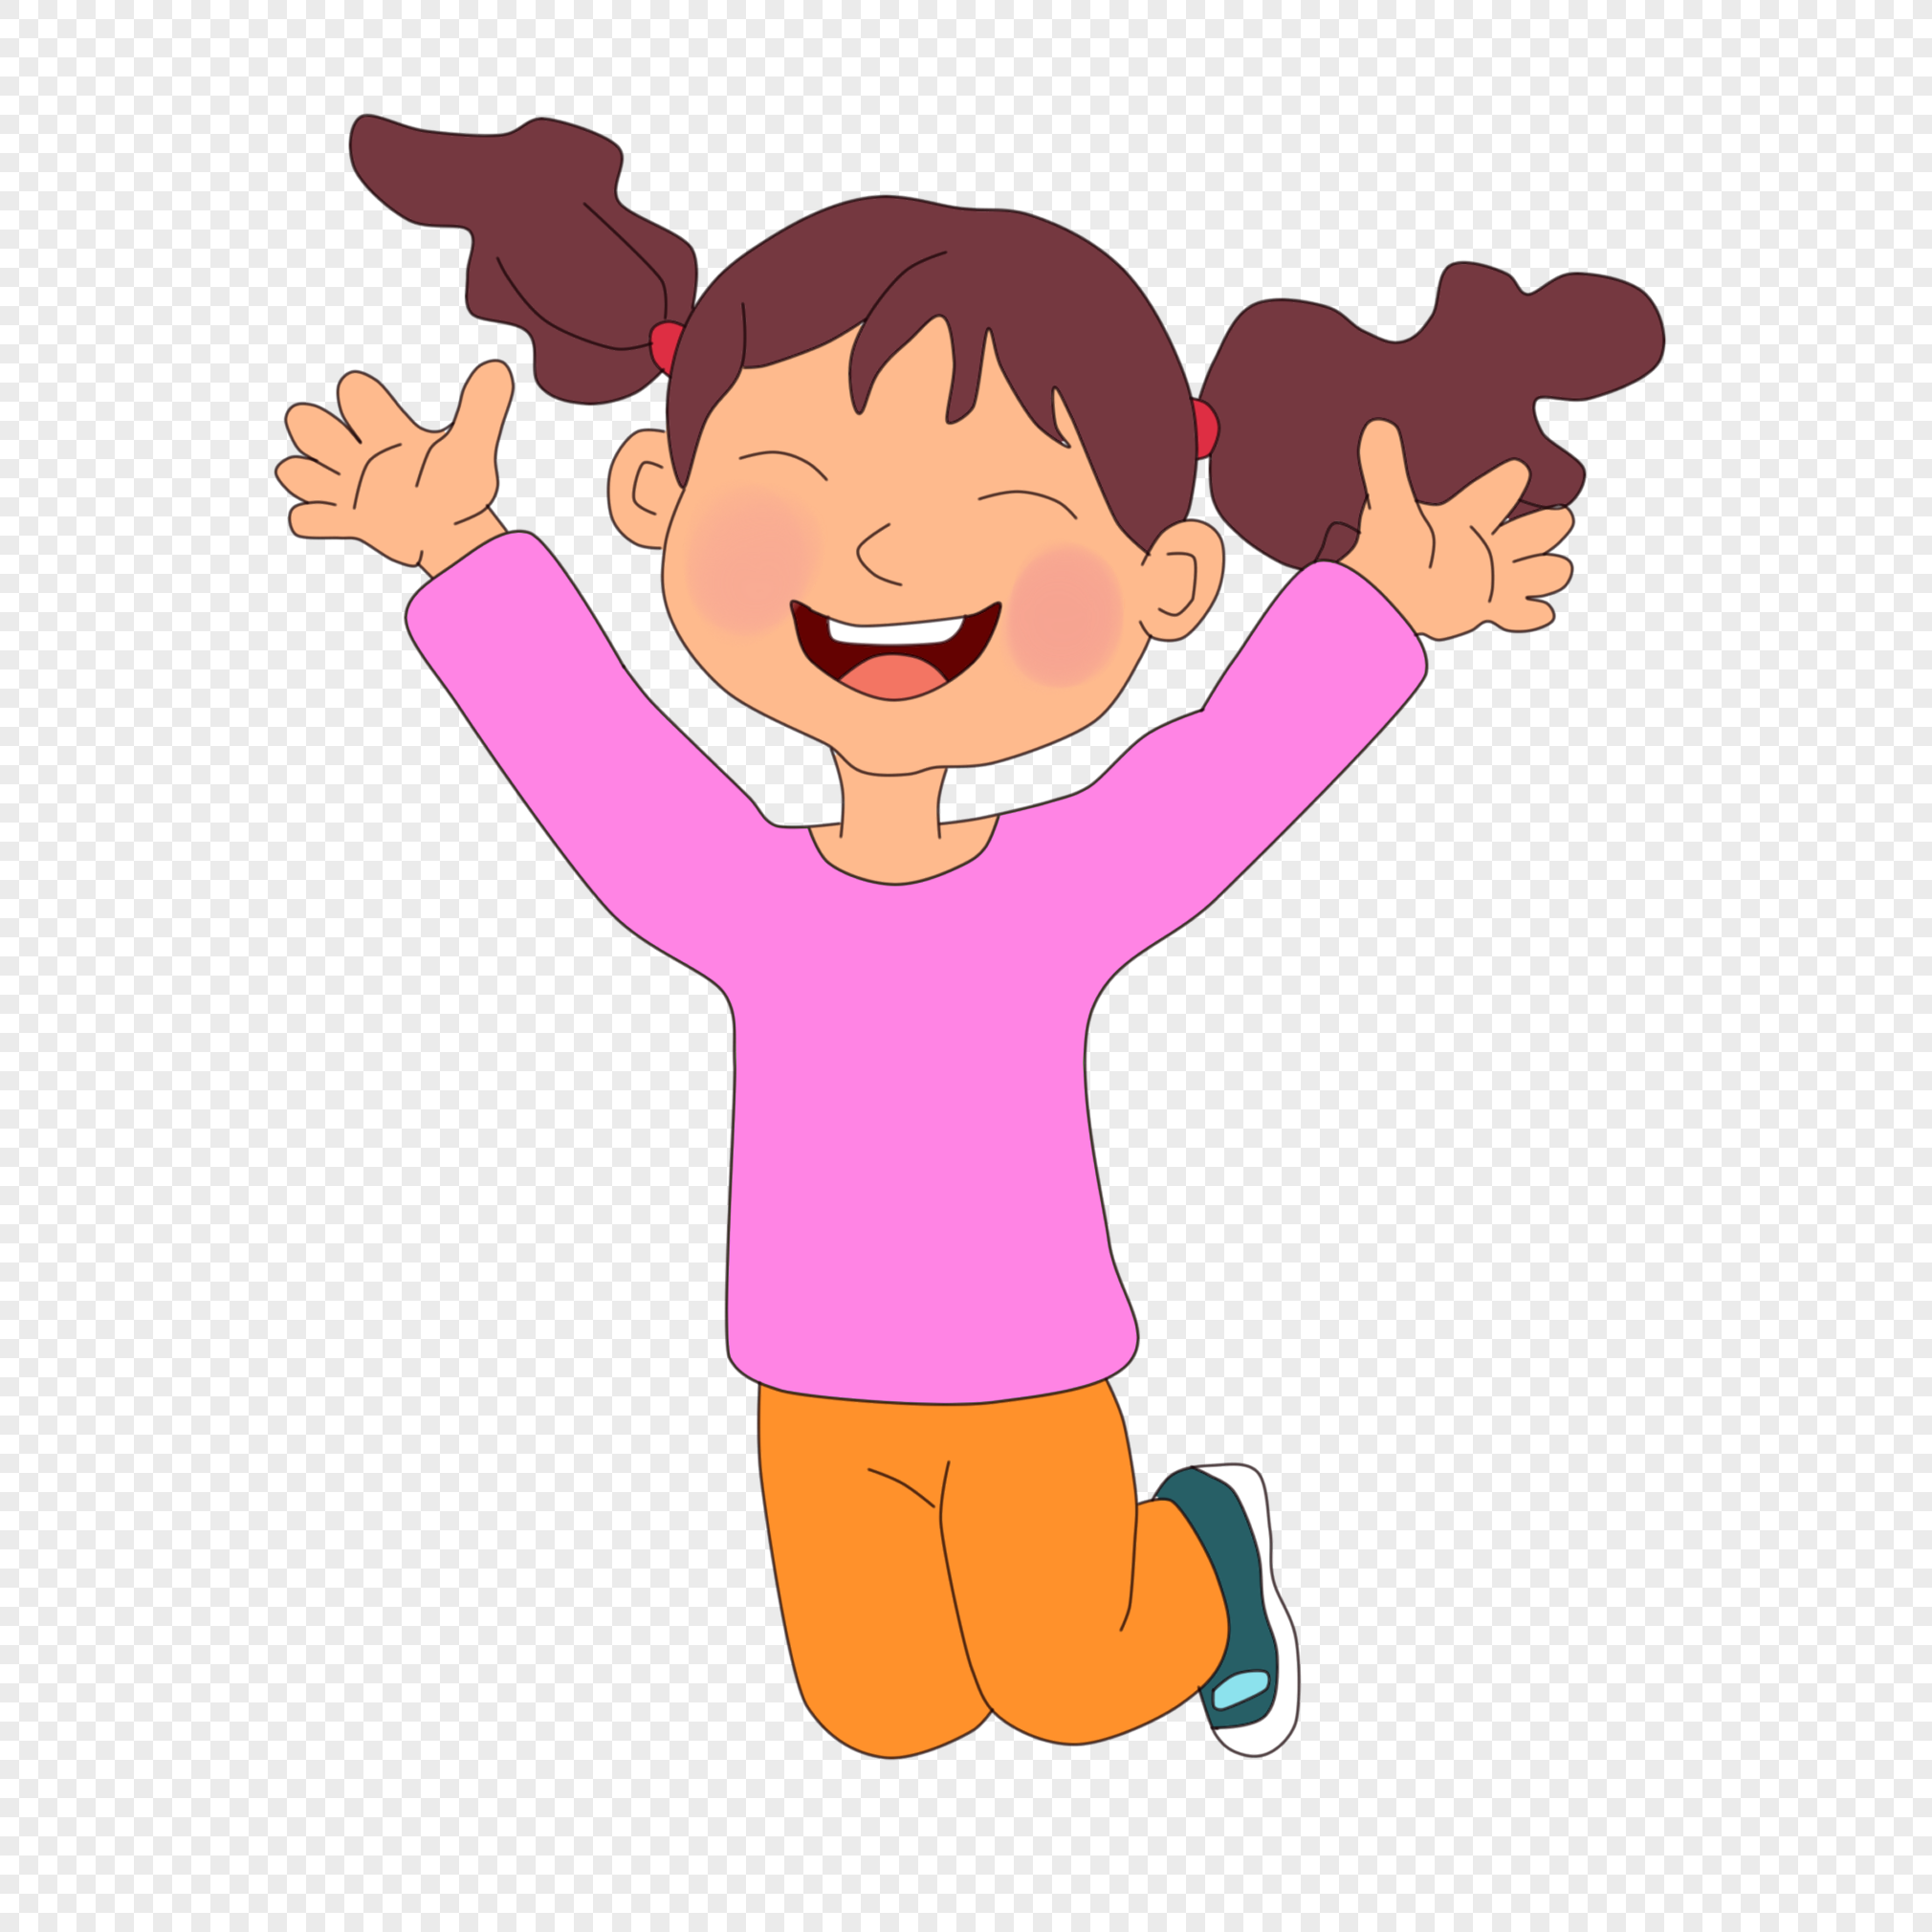 Cartoon Character Images, HD Pictures For Free Vectors Download -  